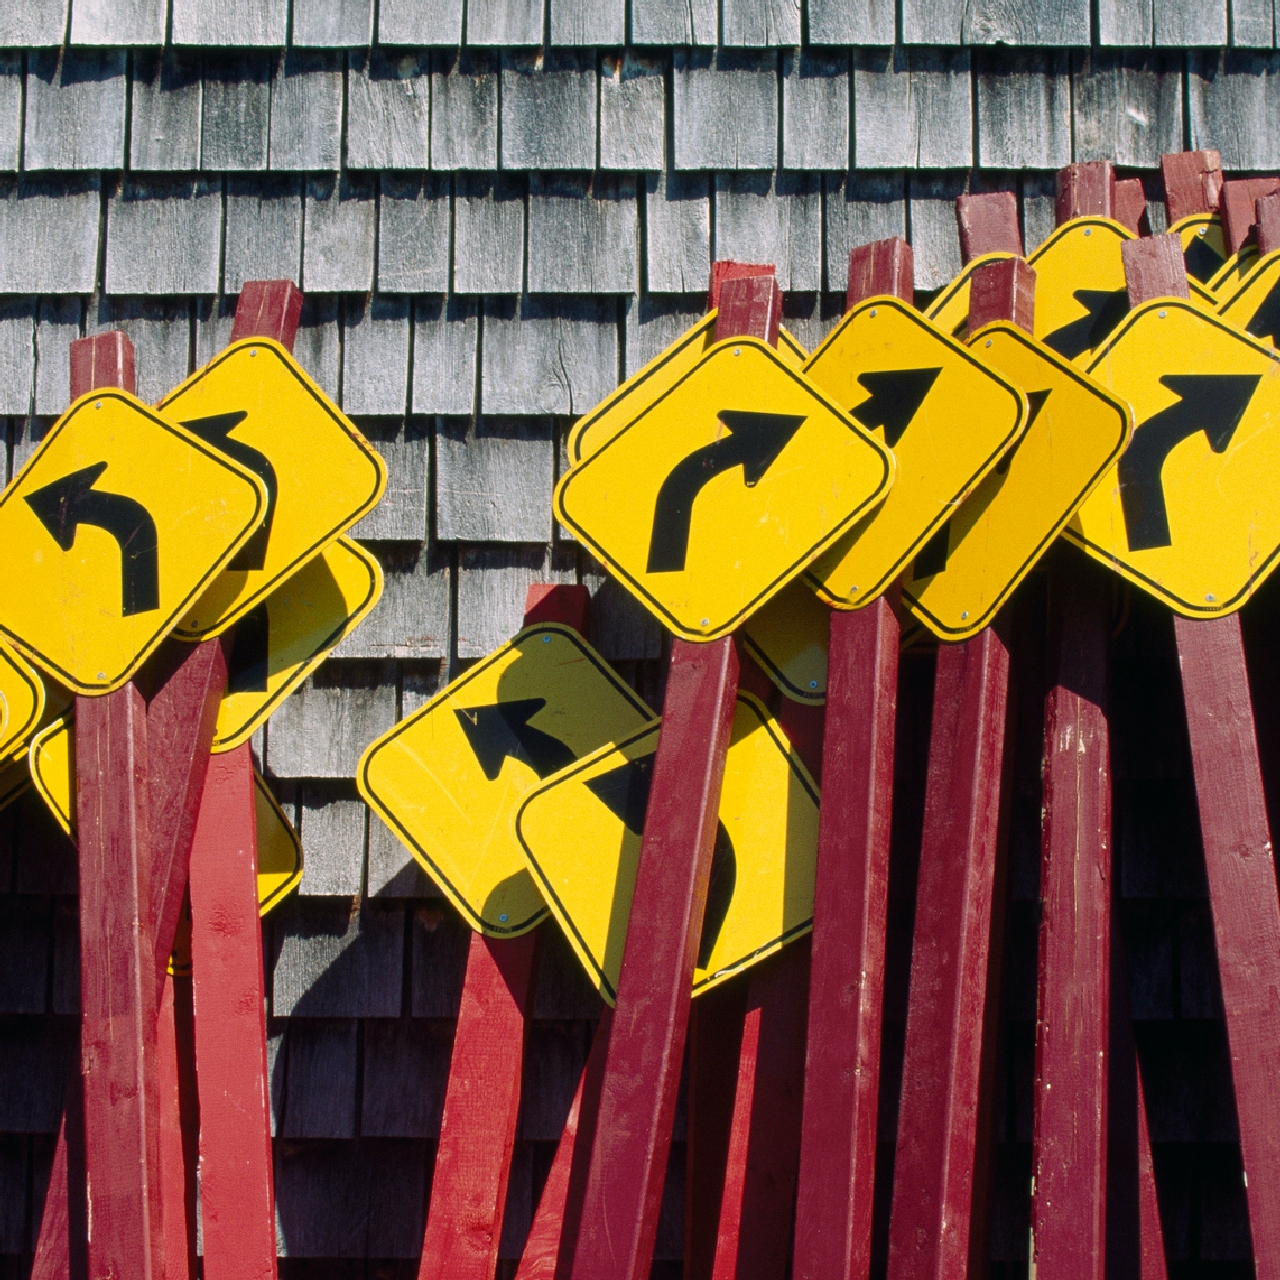 Photo of street signs with arrows pointing in different directions